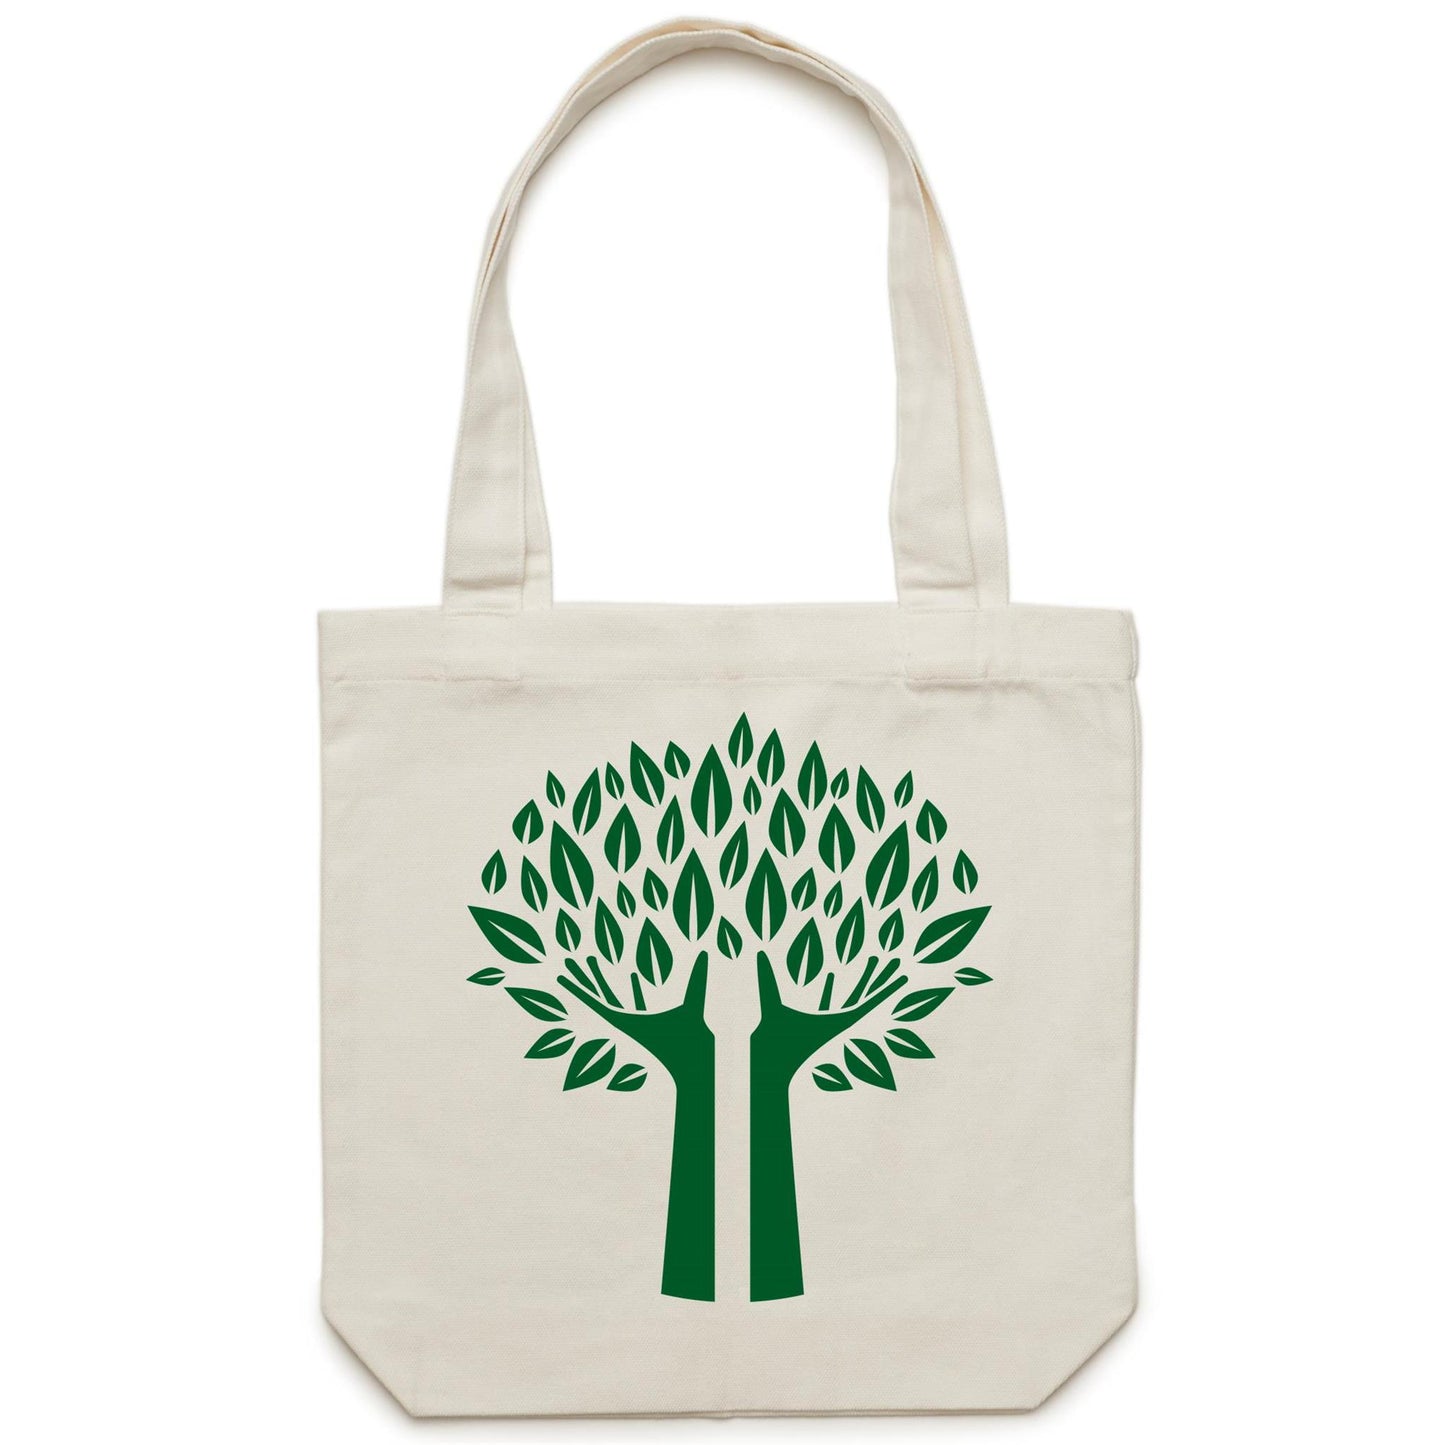 Green Tree - Canvas Tote Bag Cream One-Size Tote Bag Environment Plants